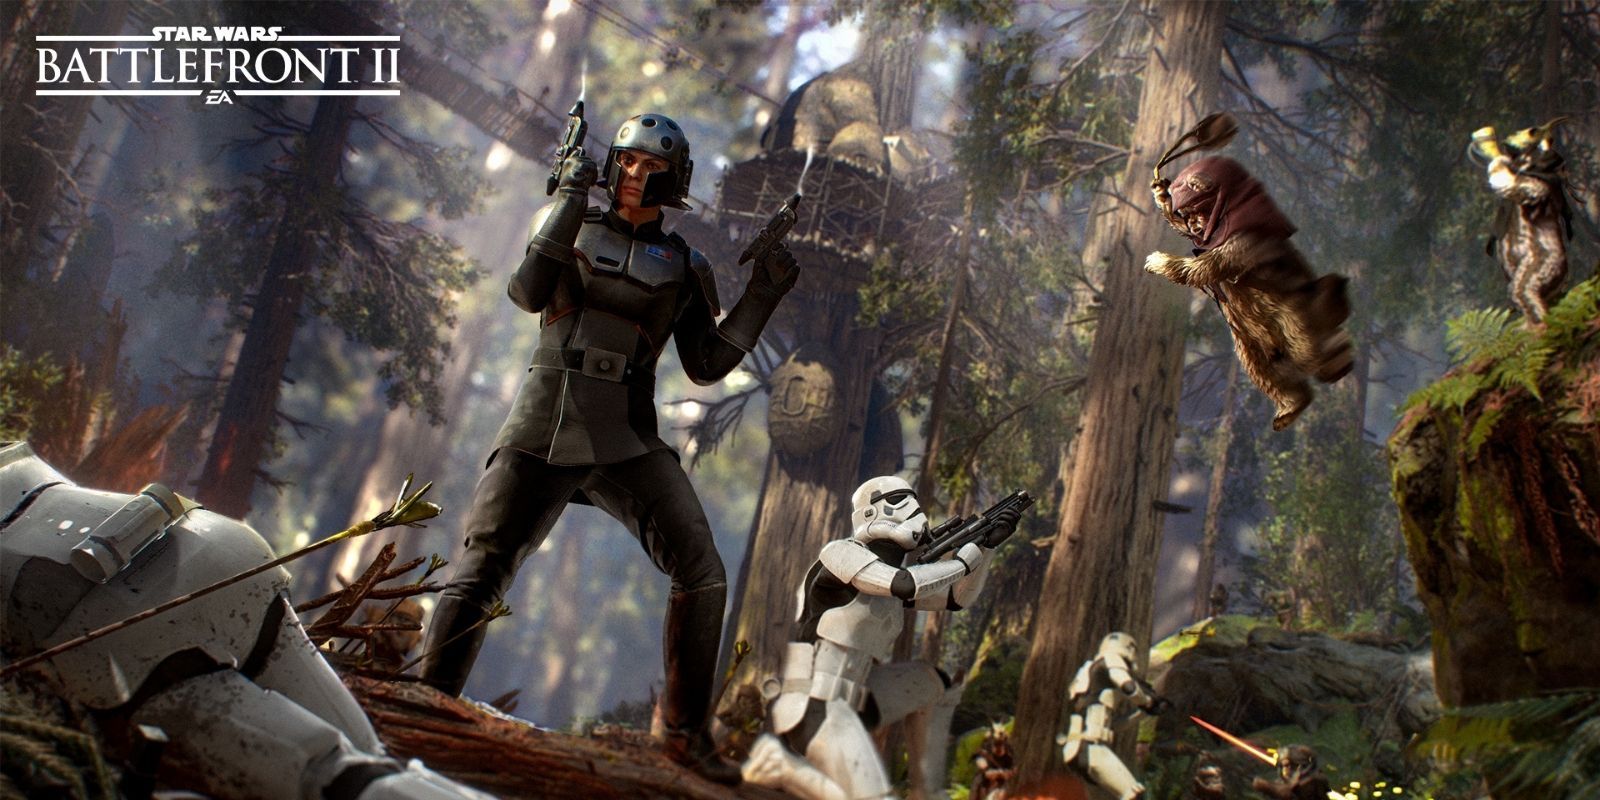 Soldiers of the Empire fighting back against Ewoks in Star Wars: Battlefront II